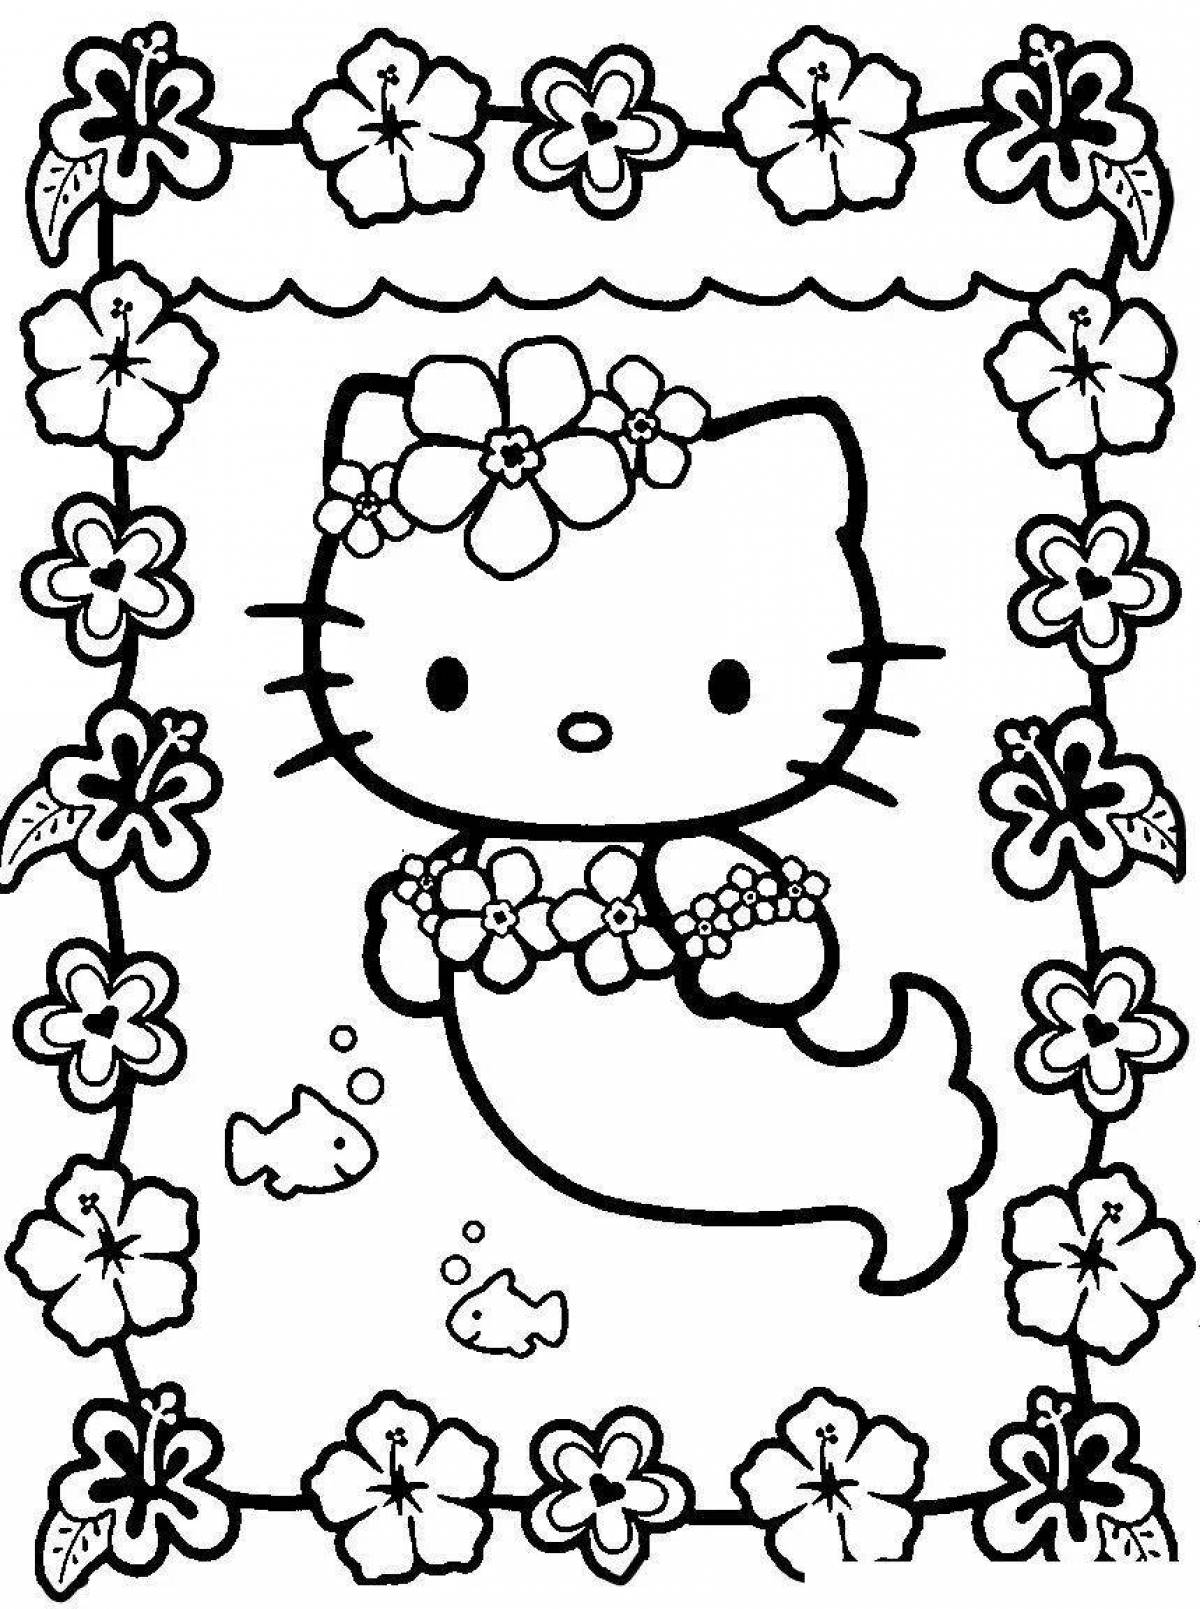 Milady's fairy tale coloring from hello kitty